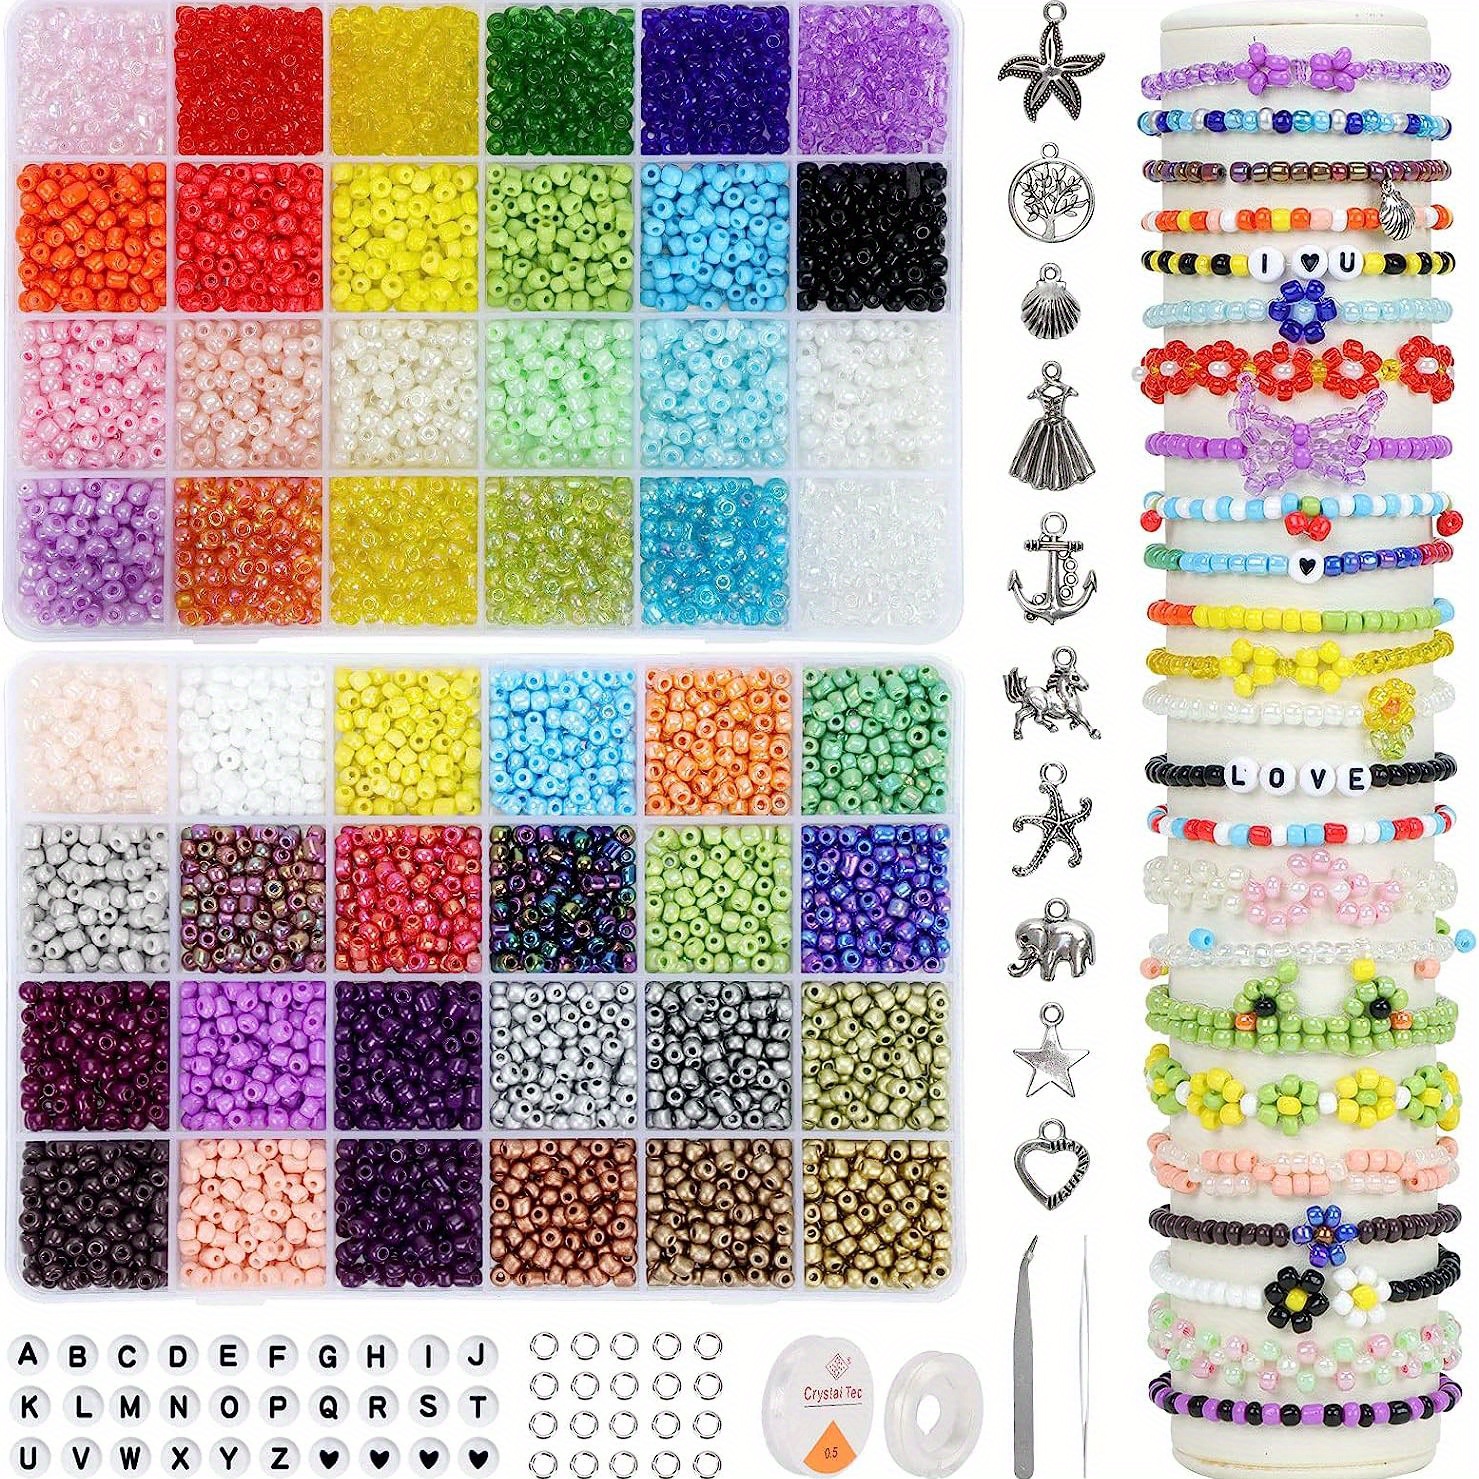 UOONY 35000pcs 2mm Glass Seed Beads for Jewelry Making Kit, 250pcs Alphabet  Letter Beads, Tiny Beads Set for Bracelets Making, DIY, Art and Craft with